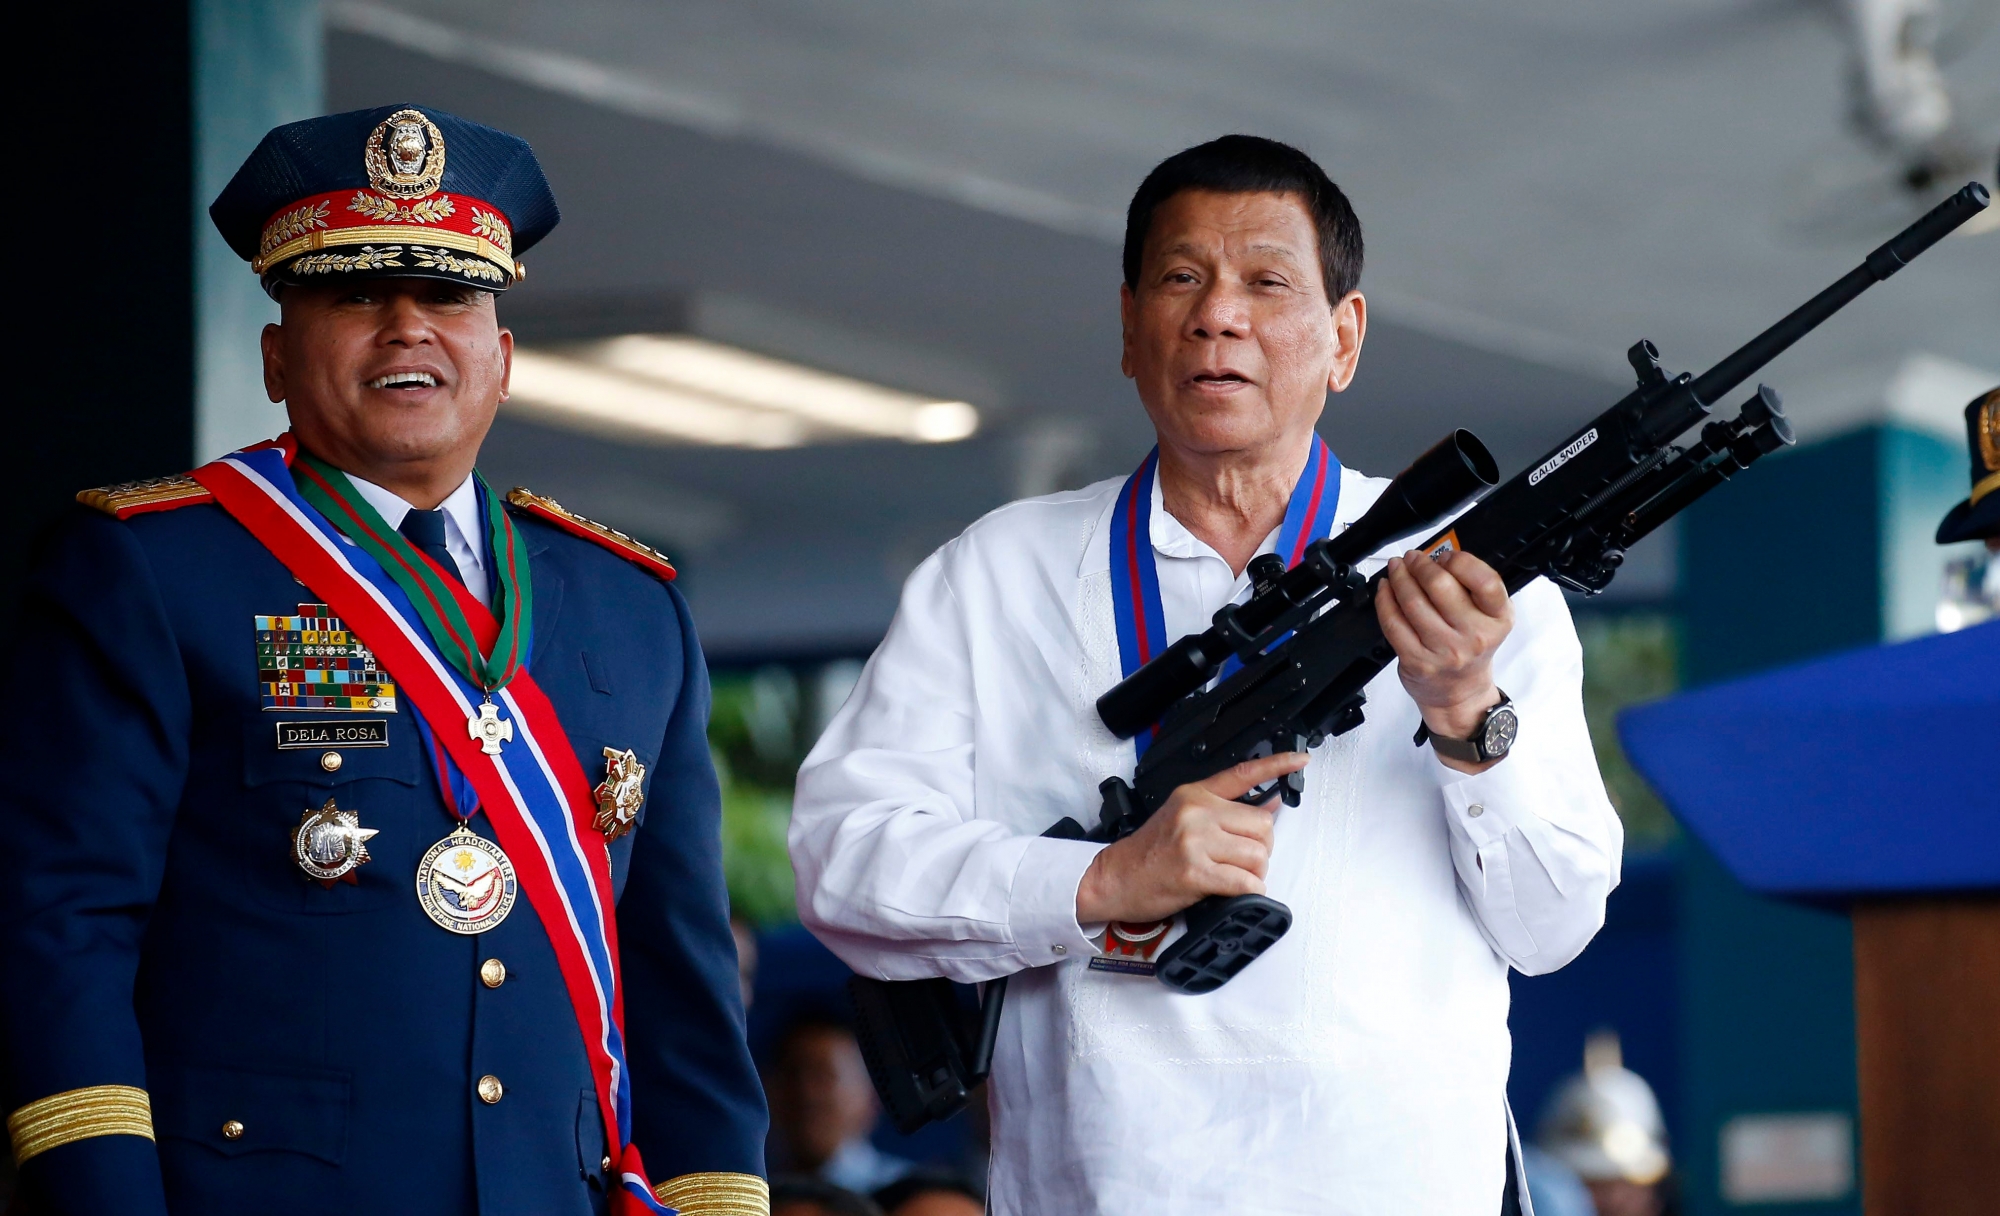 FILE - In this April 19, 2018 file photo, Philippine President Rodrigo Duterte, right, jokes to photographers as he holds an Israeli-made Galil rifle which was presented to him by former Philippine National Police Chief Director General Ronald Dela Rosa at the turnover-of-command ceremony at the Camp Crame in Quezon city northeast of Manila. Elections officials were to proclaim the winners Wednesday, May 22, 2019, after finishing the official count of the May 13 elections overnight. President Duterte backed eight winning aspirants to half of the seats in the 24-member Senate, including his former national police chief, Dela Rosa, who enforced the president's crackdown on illegal drugs in a campaign that left thousands of suspects dead and drew international condemnation. (AP Photo/Bullit Marquez, File) Philippines Elections